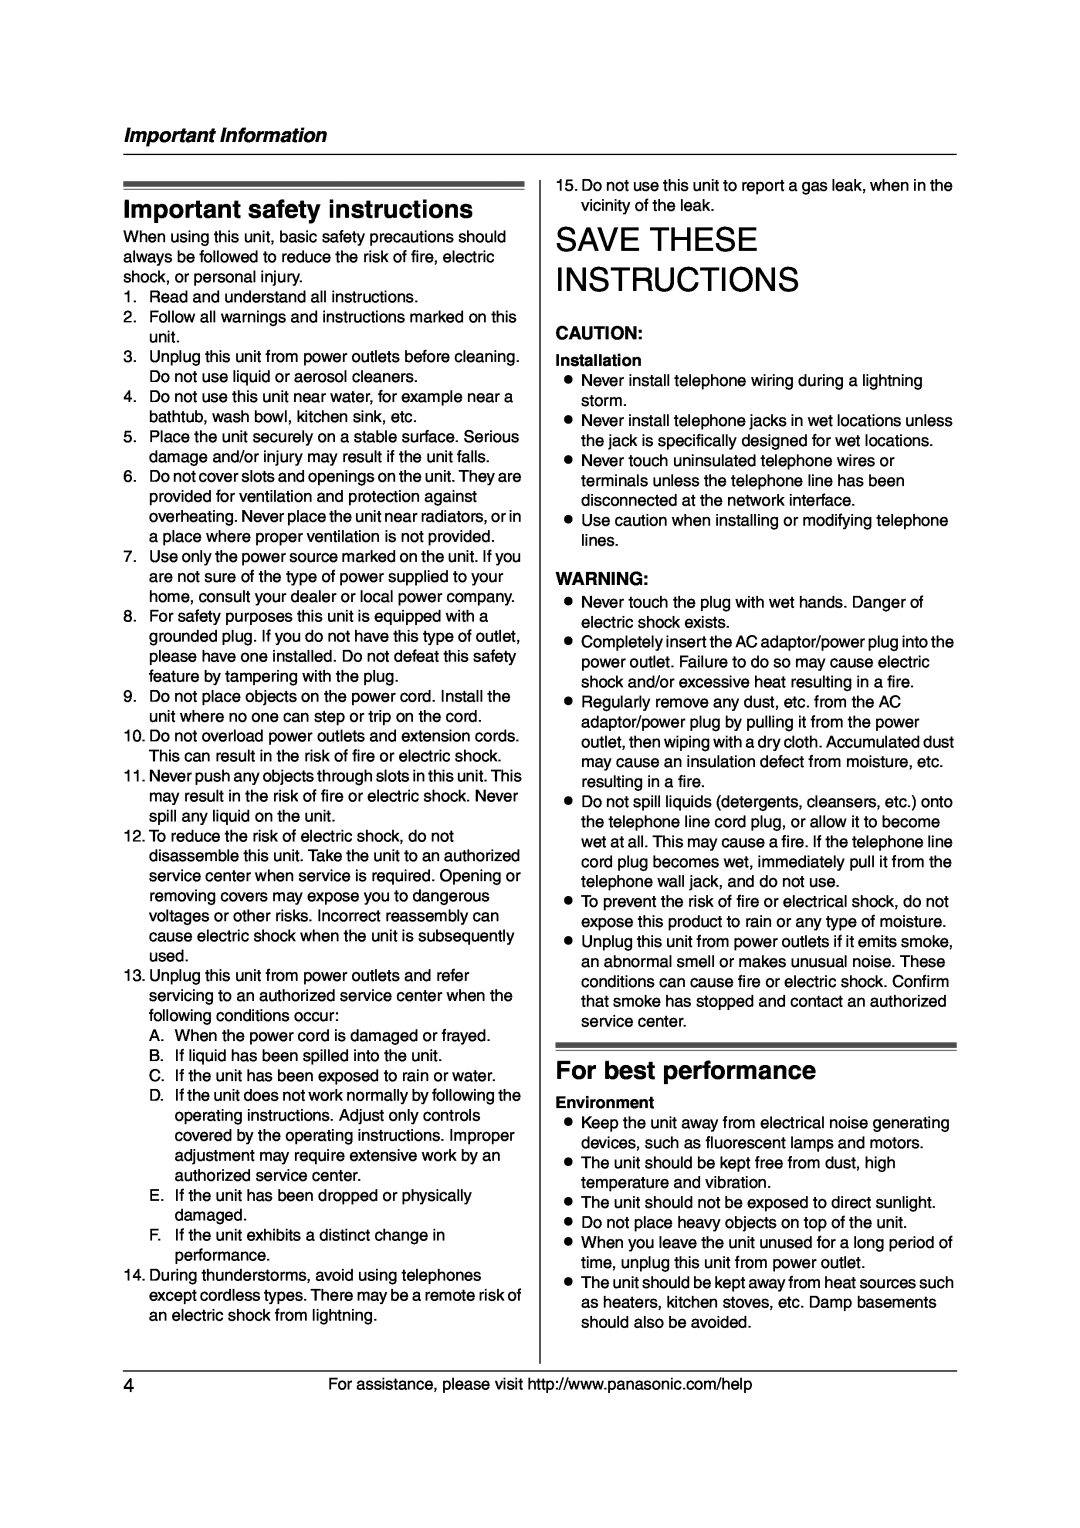 Panasonic KX-FP215 Important safety instructions, For best performance, Save These Instructions, Important Information 